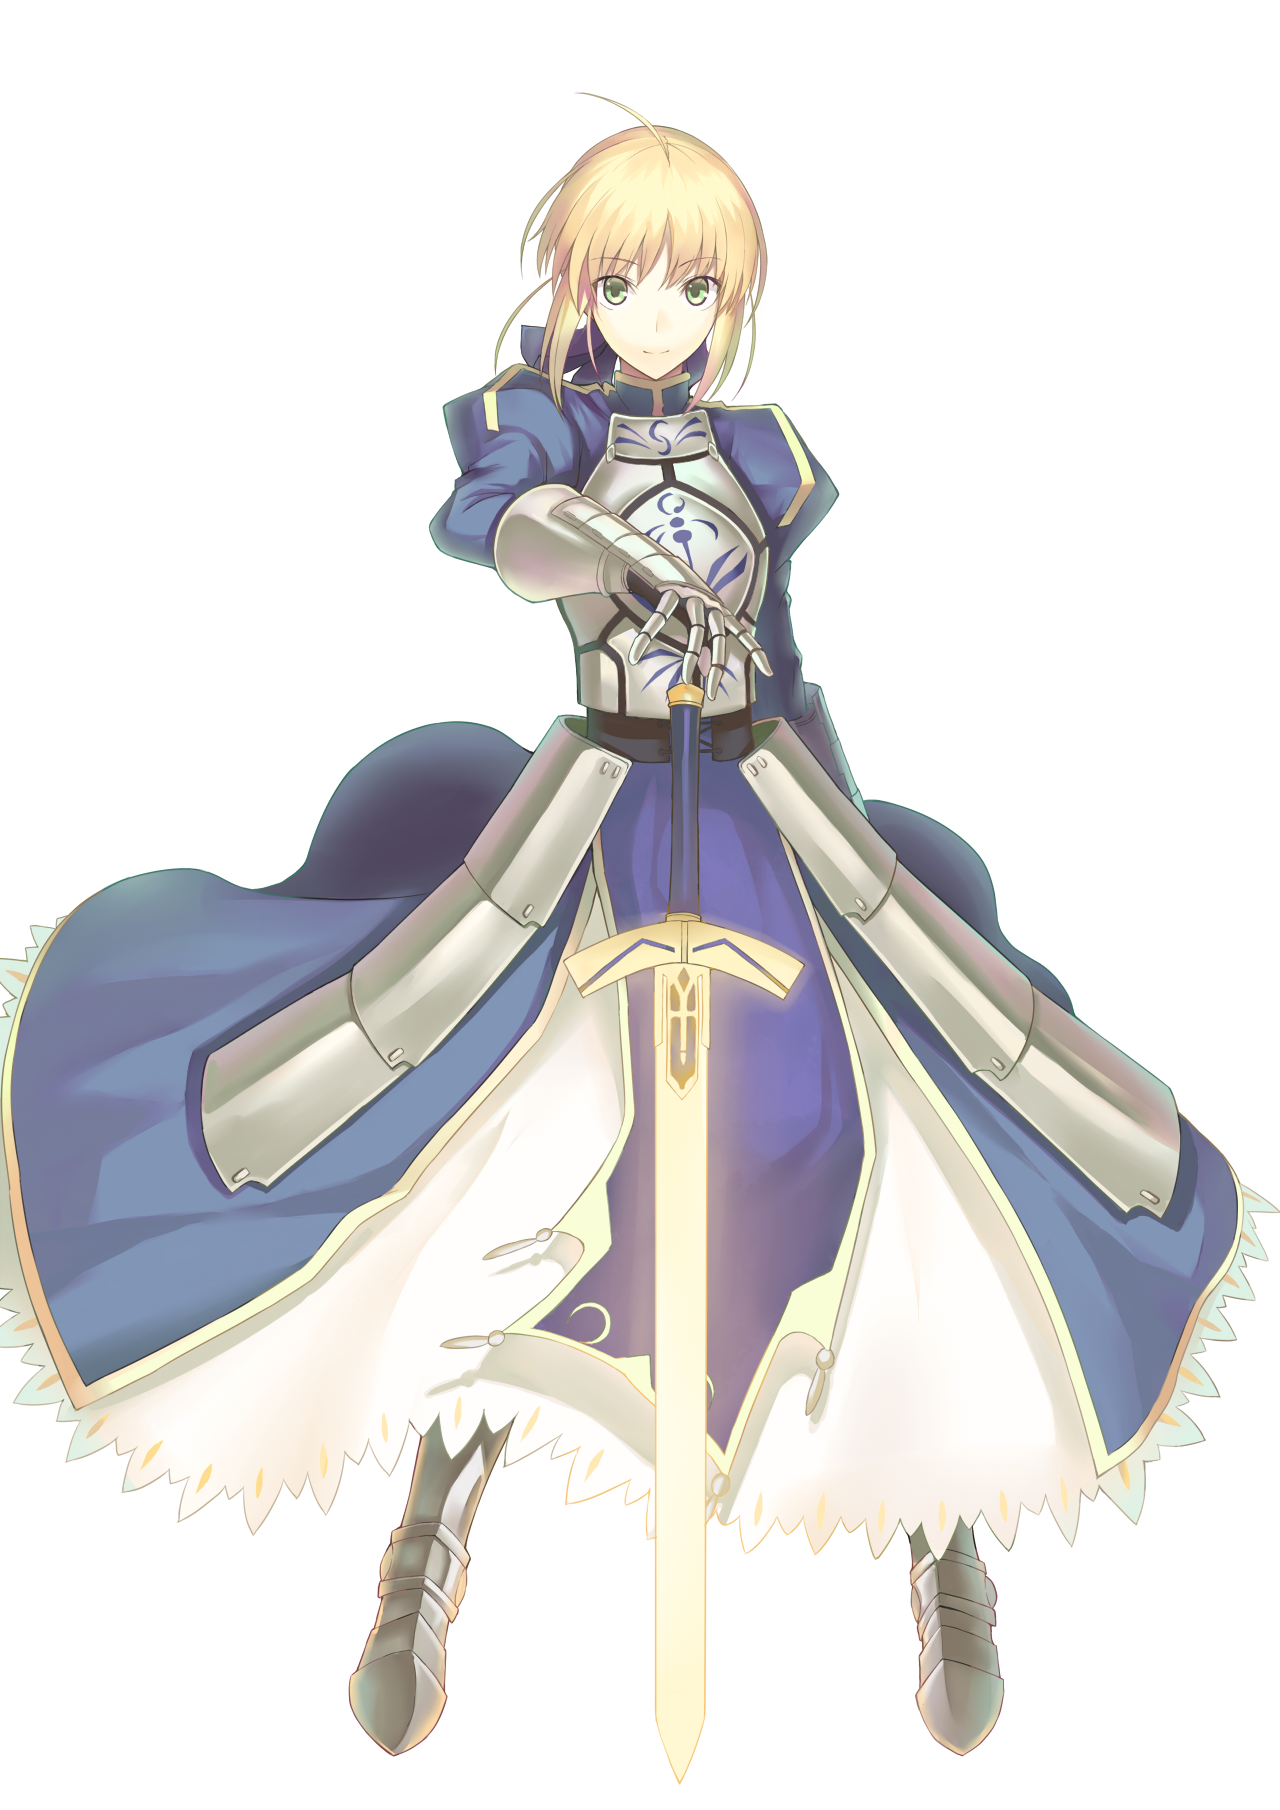 Anime 1280x1810 anime anime girls standing Excalibur Fate series Fate/Stay Night Fate/Grand Order Artoria Pendragon Saber blonde